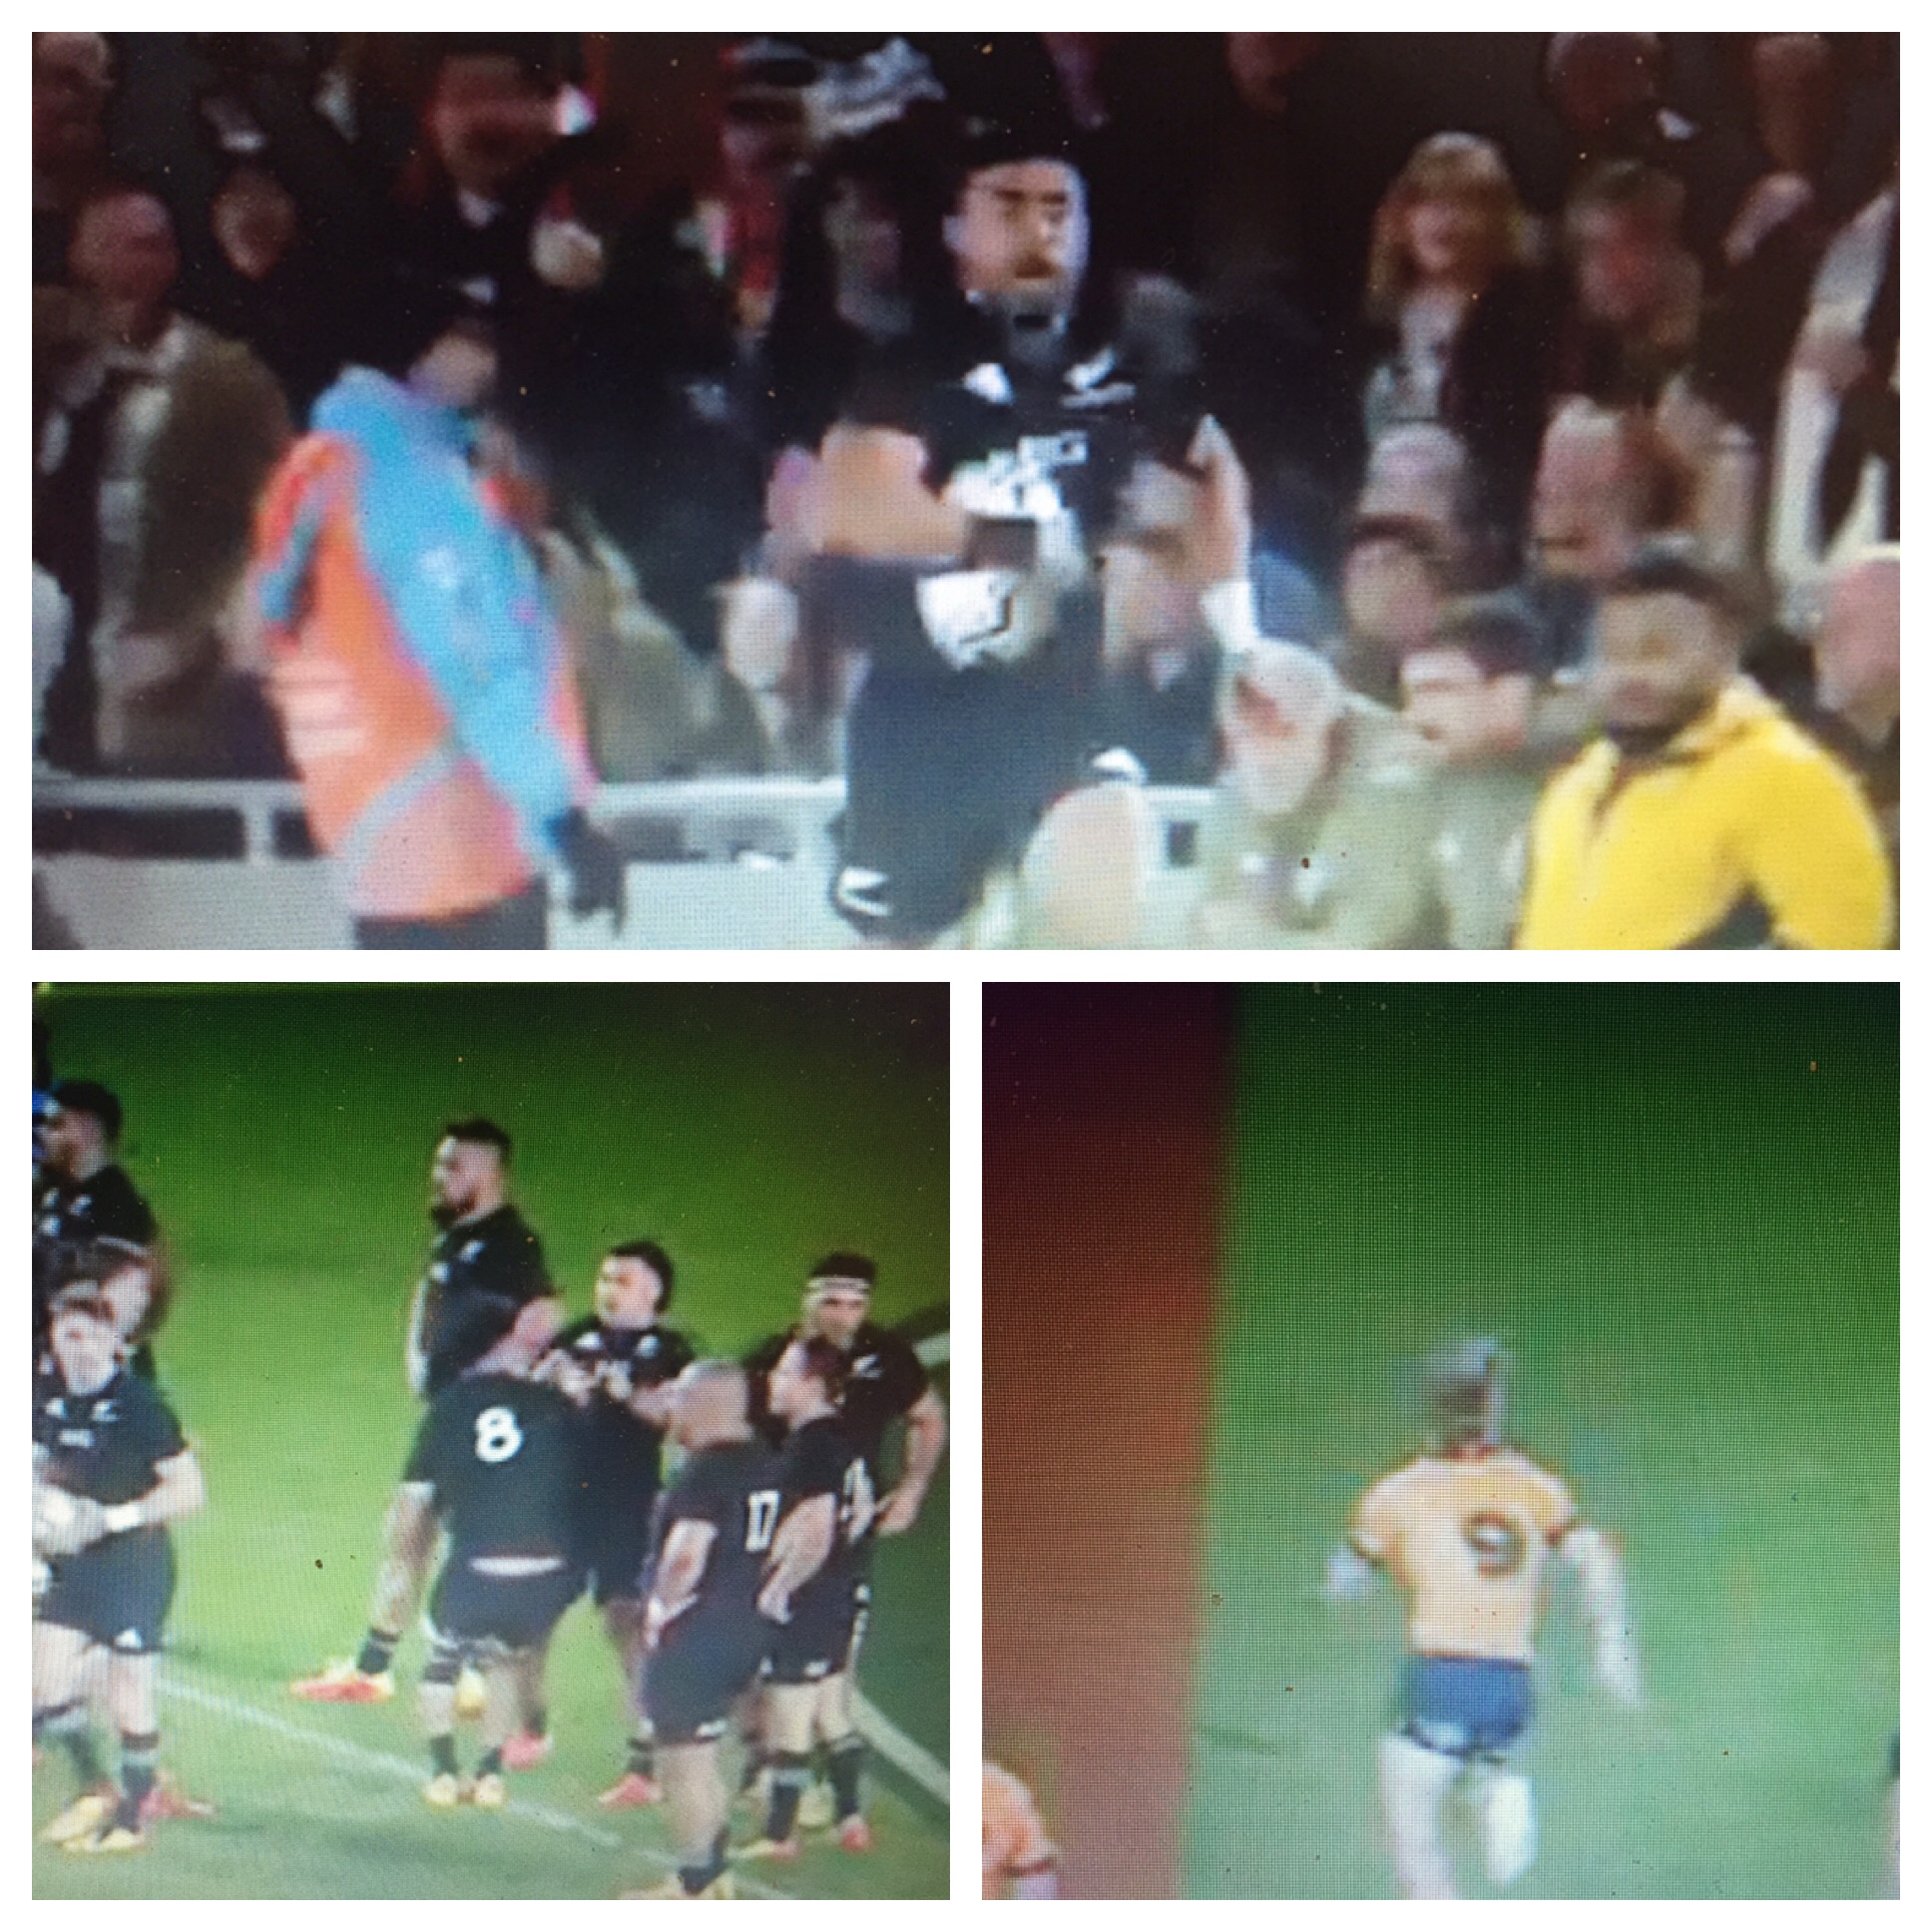 Rugby Union News, Top 3 players from 2021 Bledisloe Cup Game 1 at Eden Park, All Blacks v Wallabies